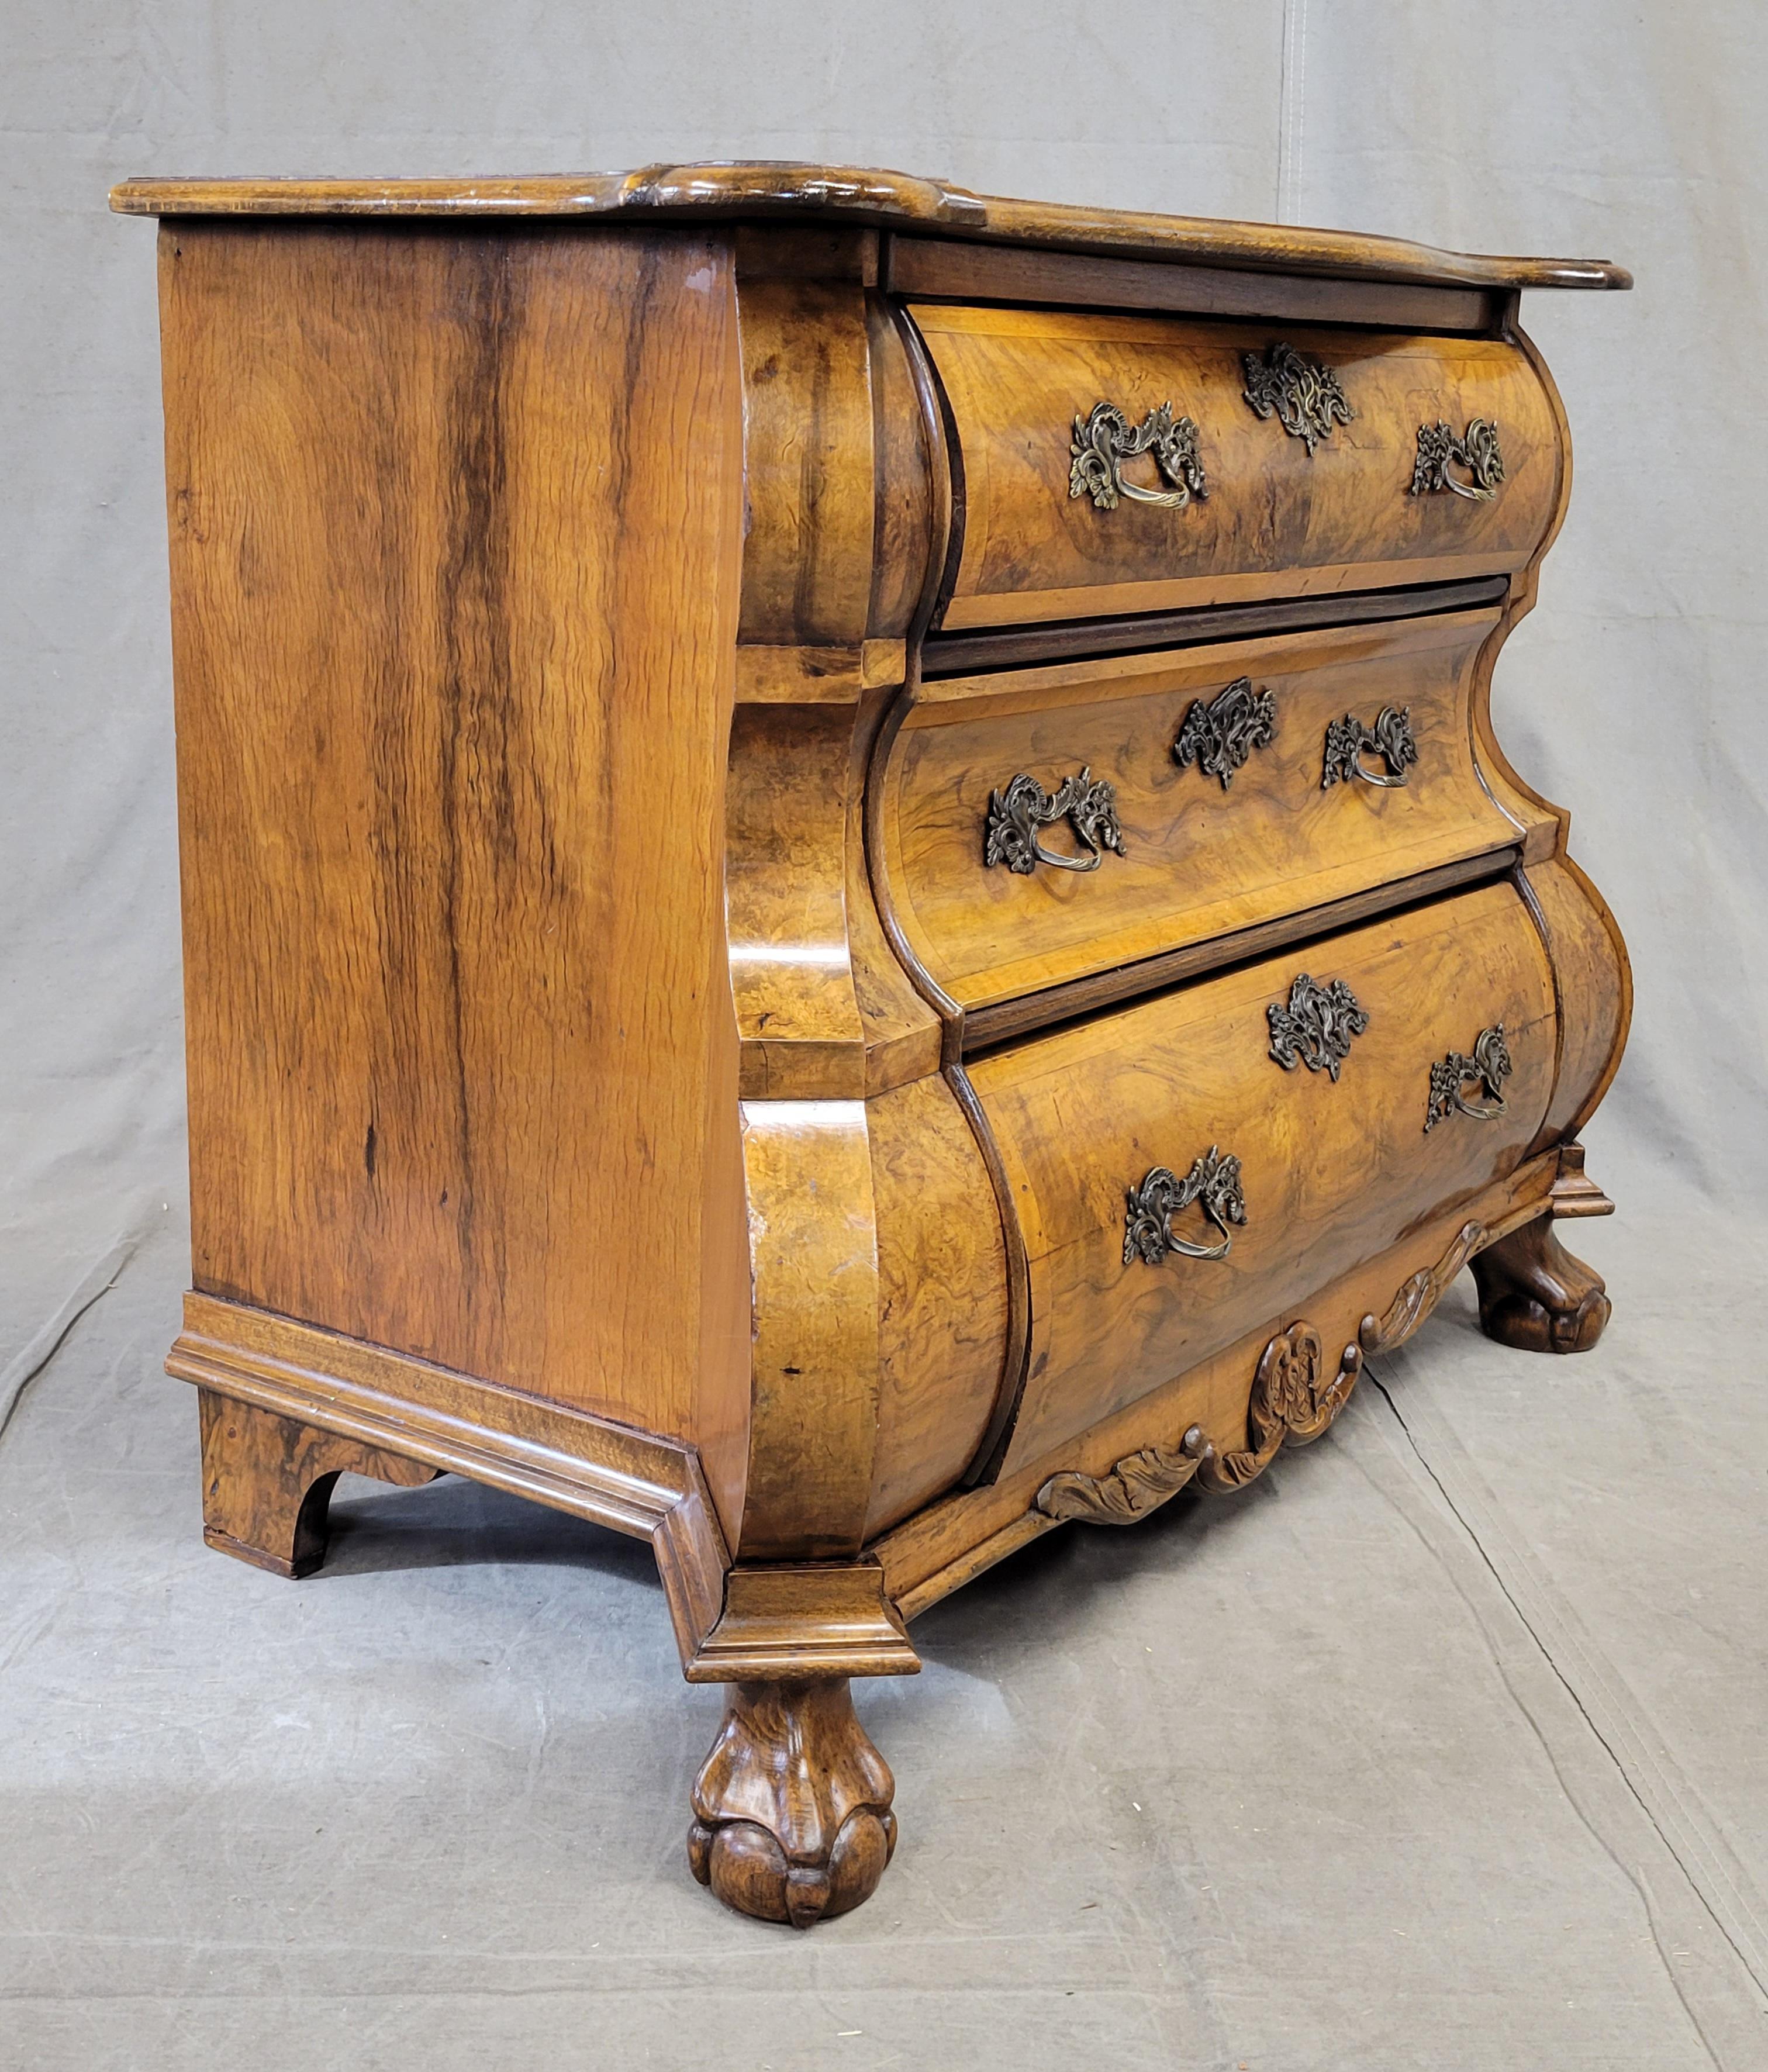 This piece is absolutely stunning! This chest of drawers appears to be vintage, made perhaps between the 1930s and 1950s, in a very traditional style by an expert craftsperson. The walnut veneer is absolutely stunning, bookmatched on the top, see